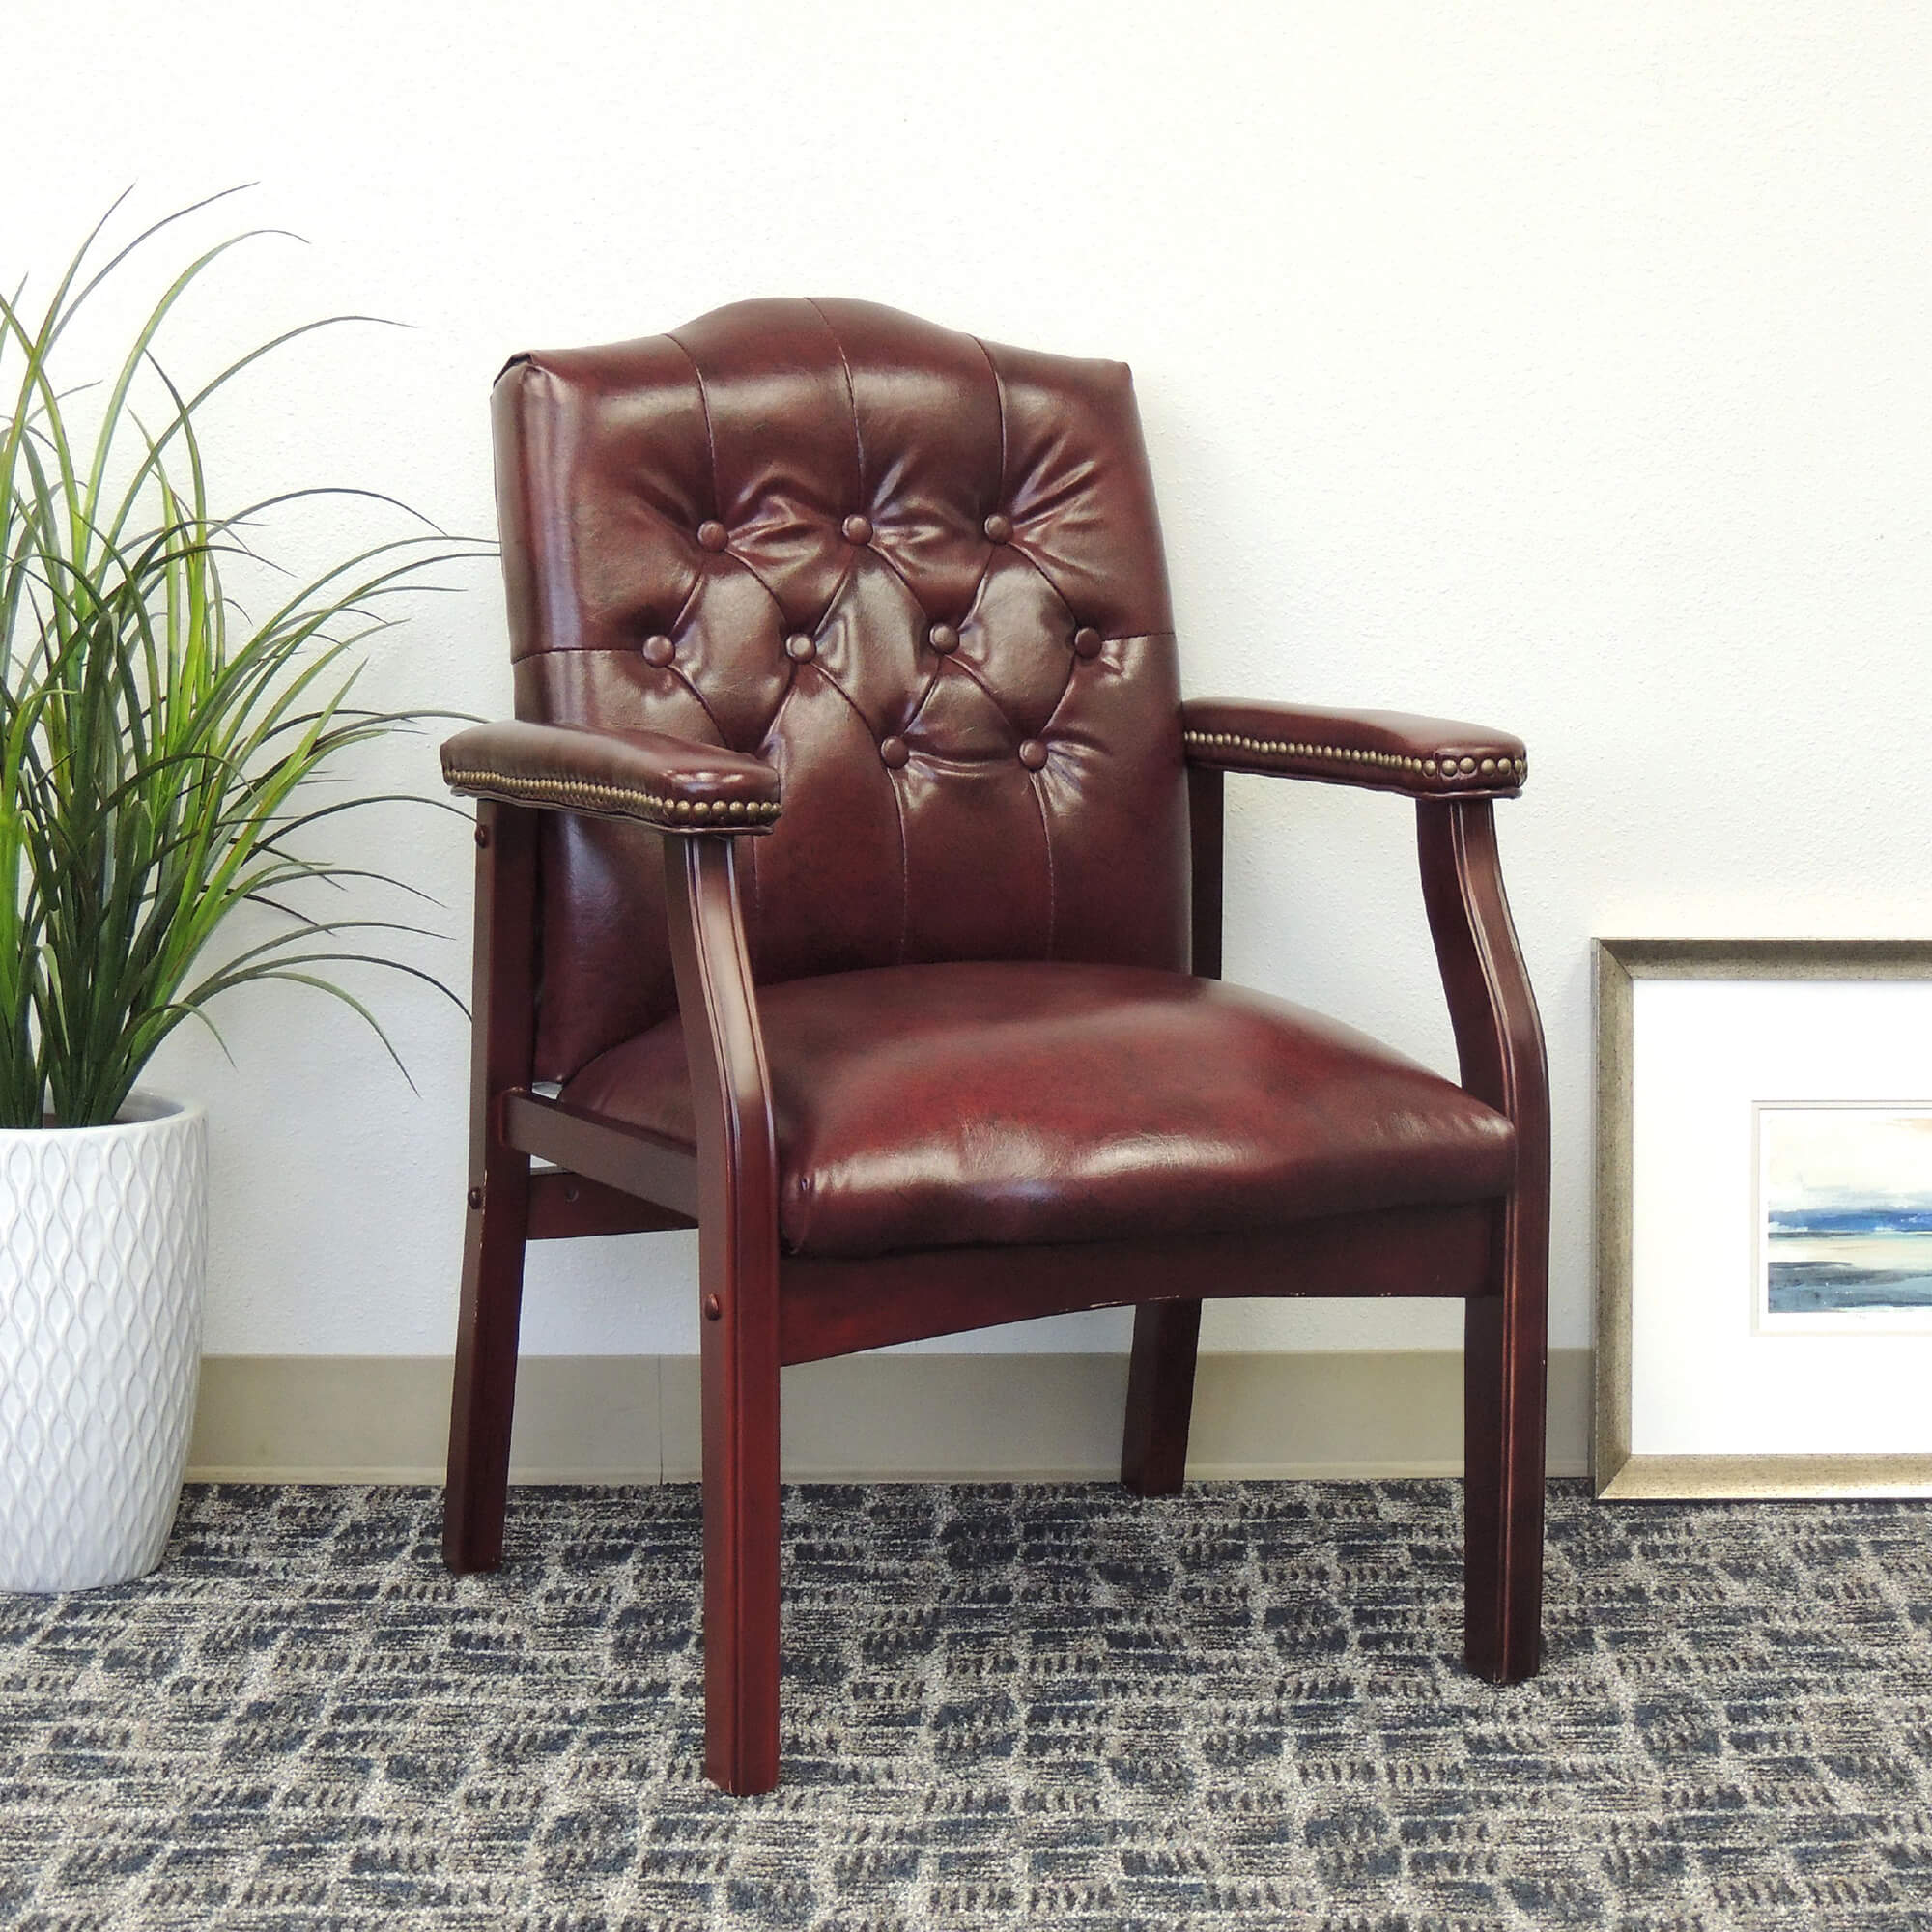 Goldendale waiting room chairs with arms 1